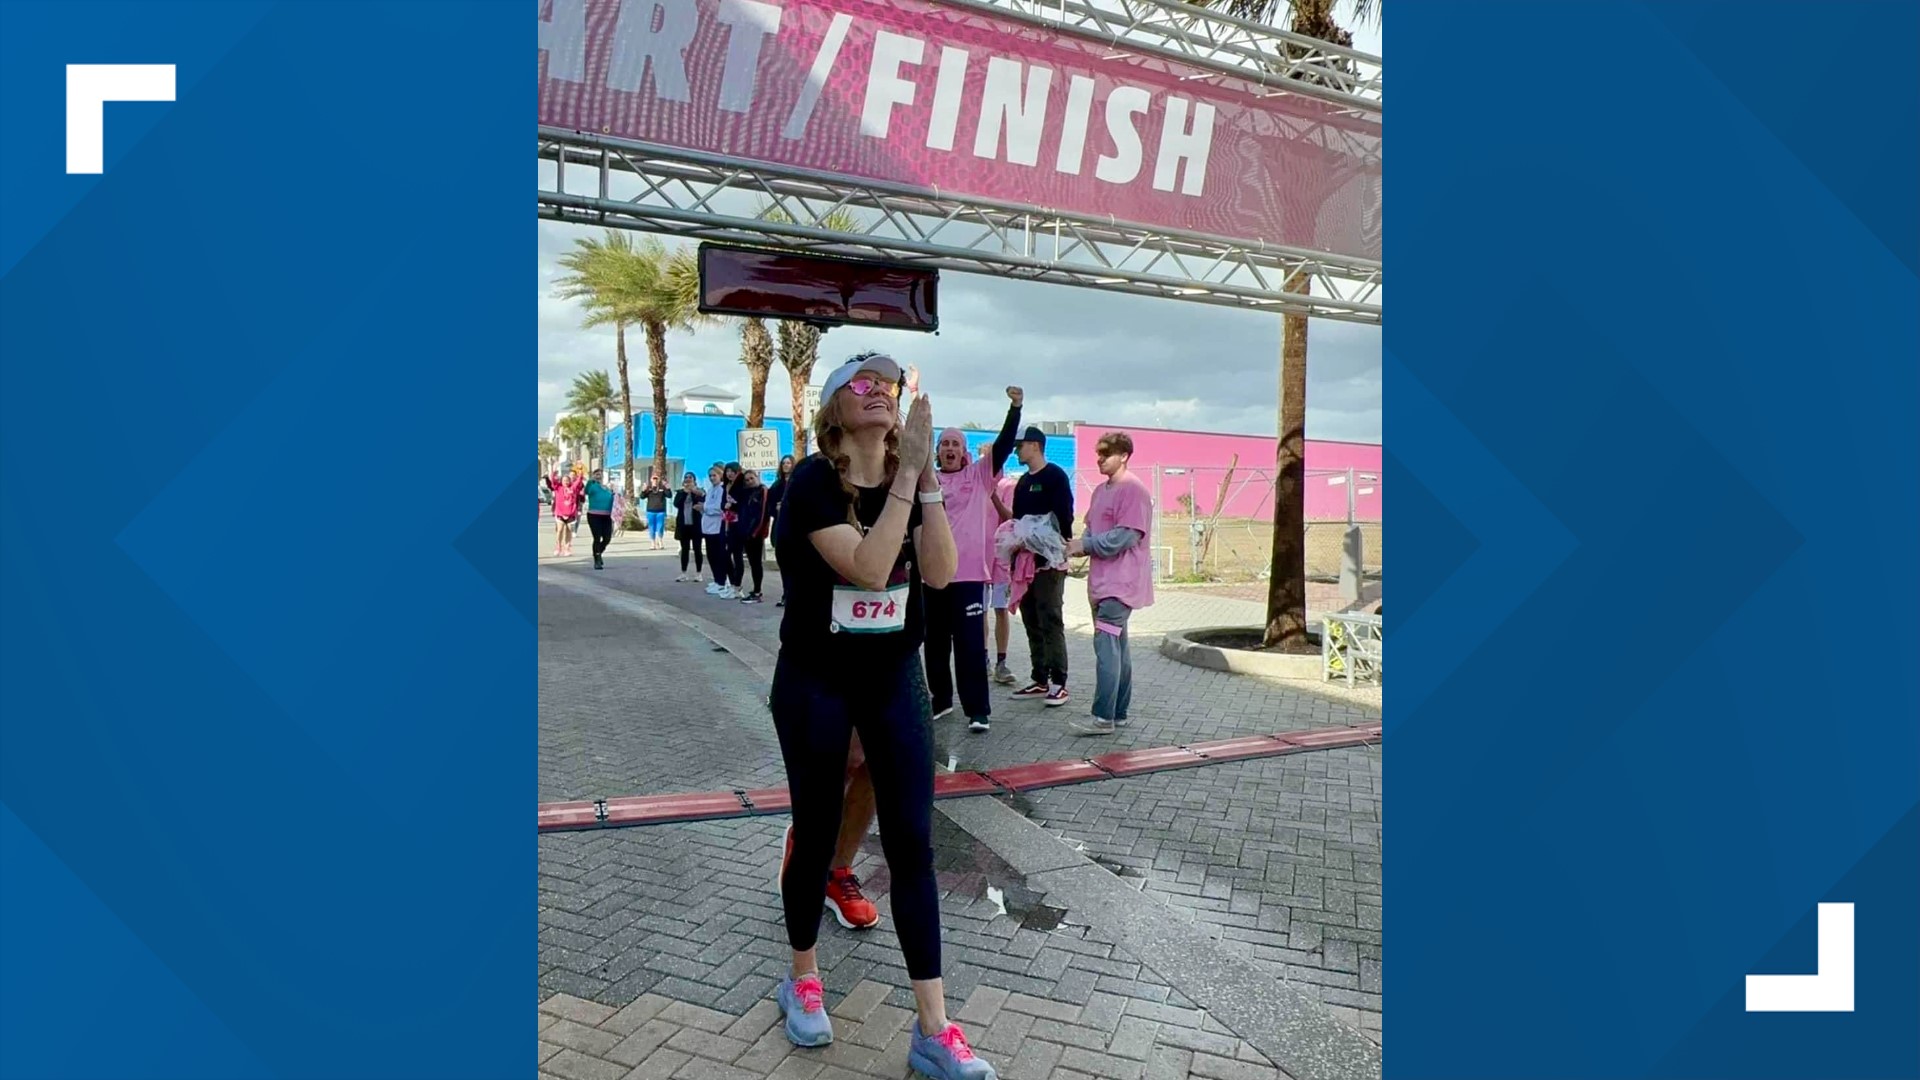 We told you about a Jacksonville woman who was running the DONNA Marathon after receiving a heart transplant. The update...she did it!